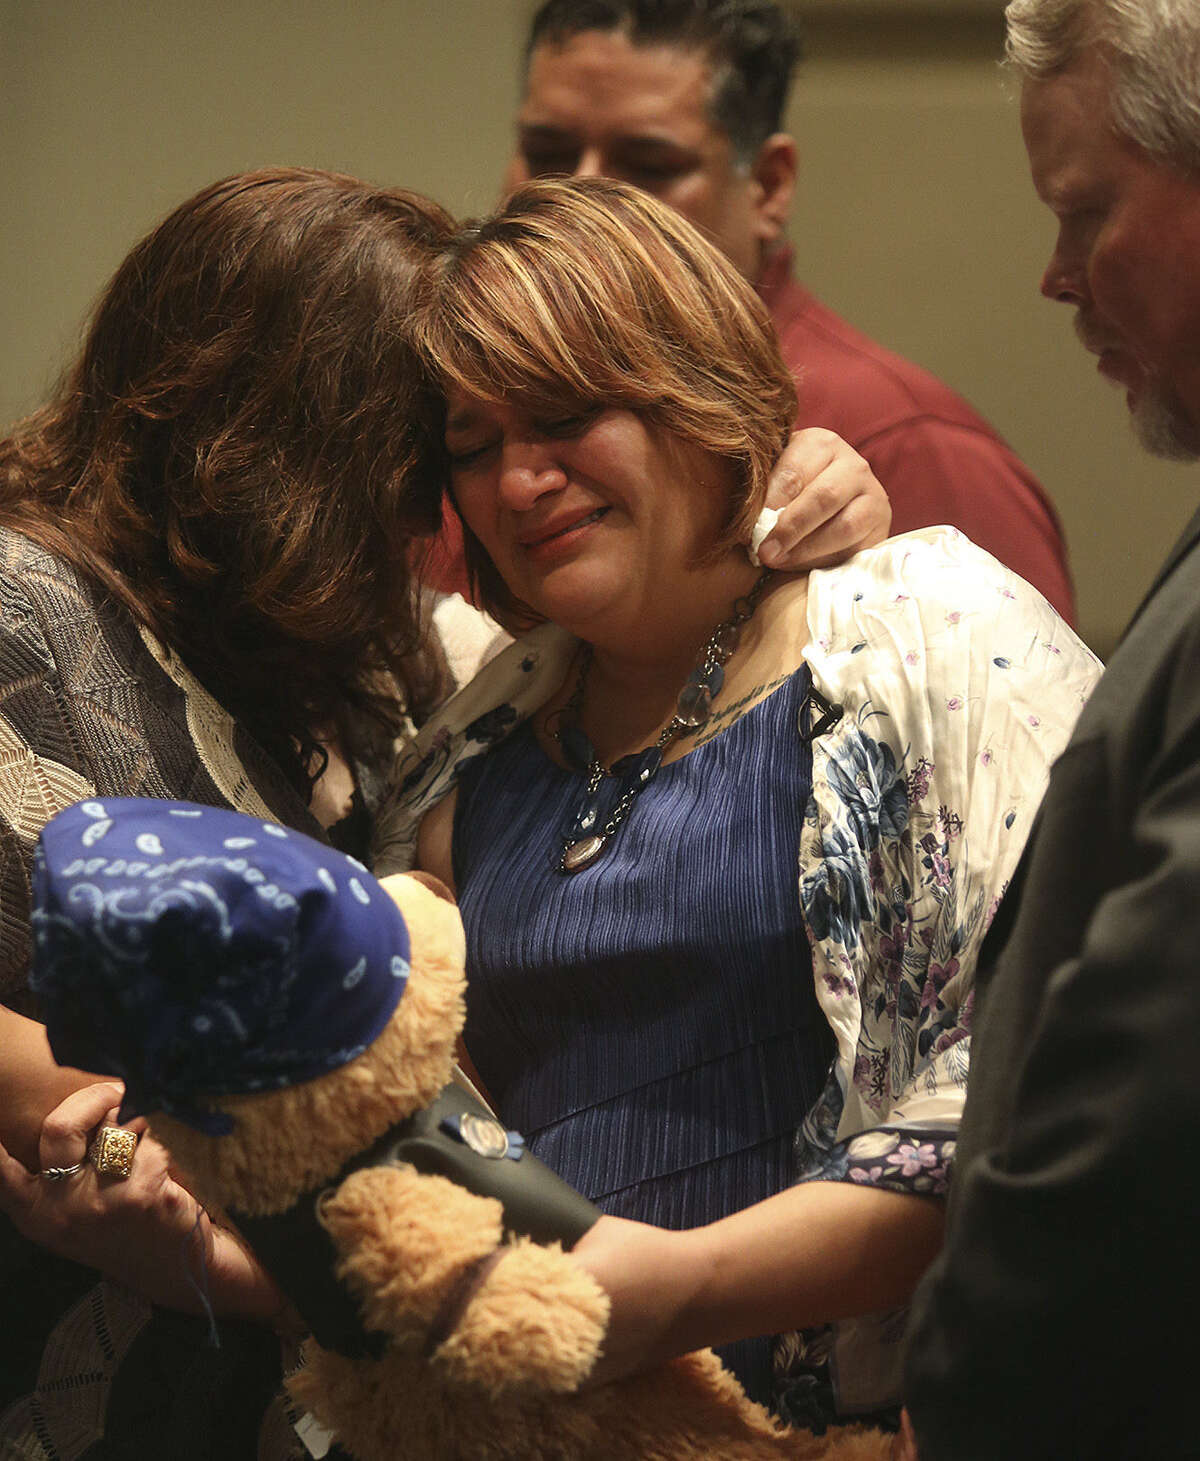 Pamela Allen (center) holds a bear given to her by the Guardians of the Children motorcycle group as she grieves with her sister Yvette Montejano (left), brother Samuel Espurvoa (back) and husband Tim Allen at the end of Baby Noel's funeral March 22.